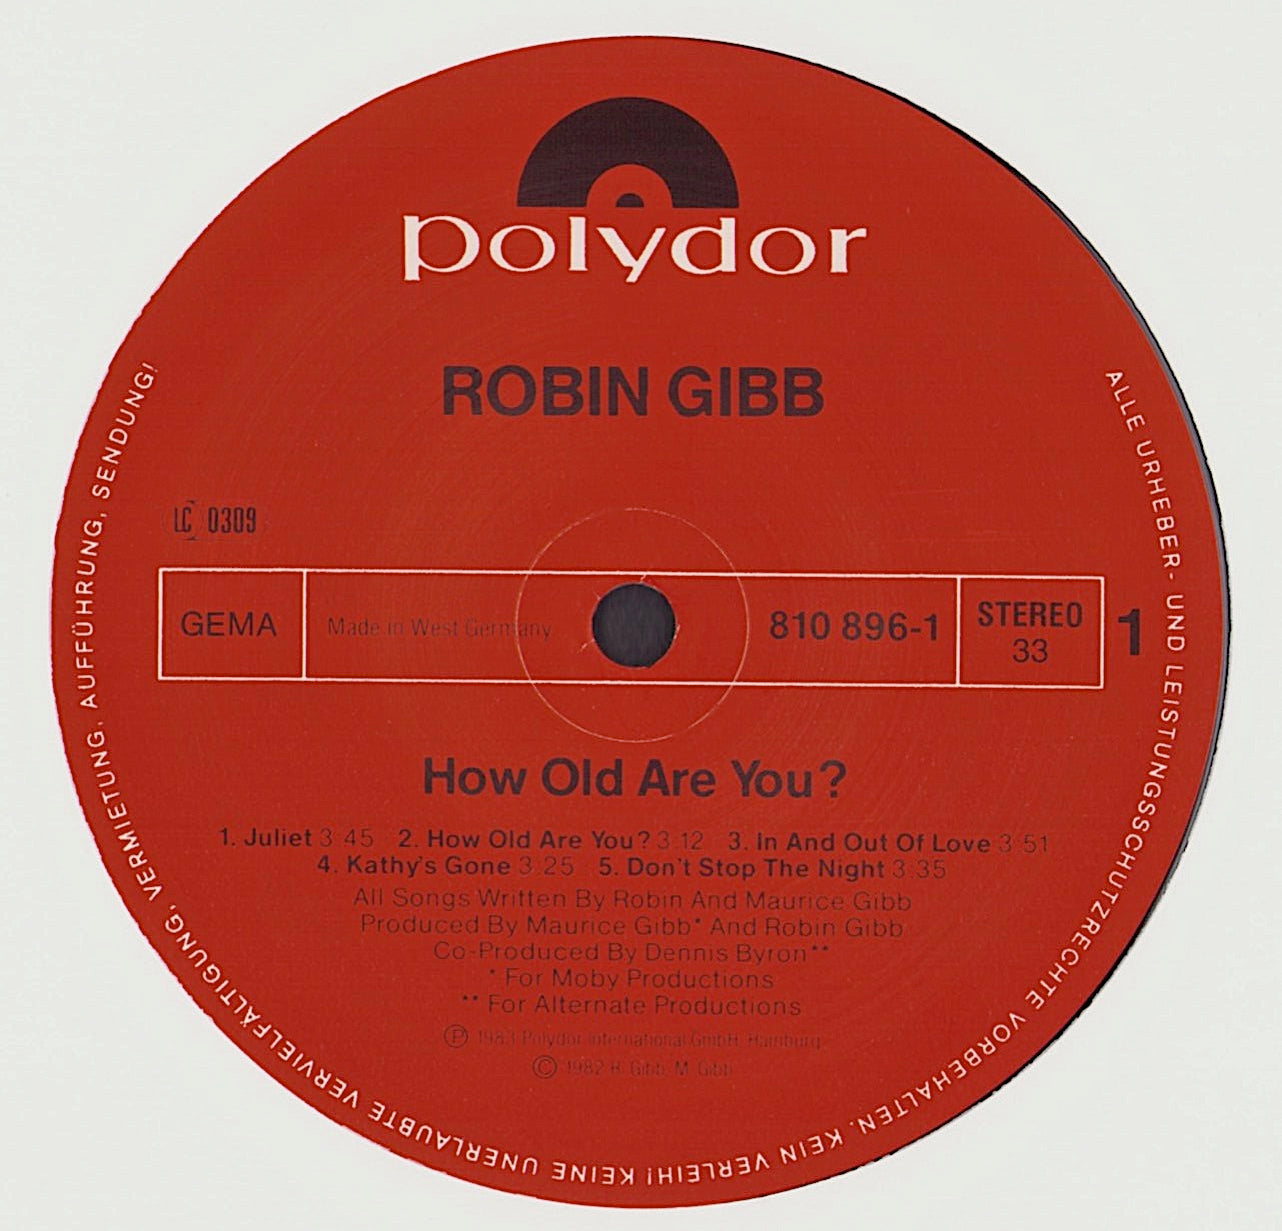 Robin Gibb - How Old Are You? Vinyl LP